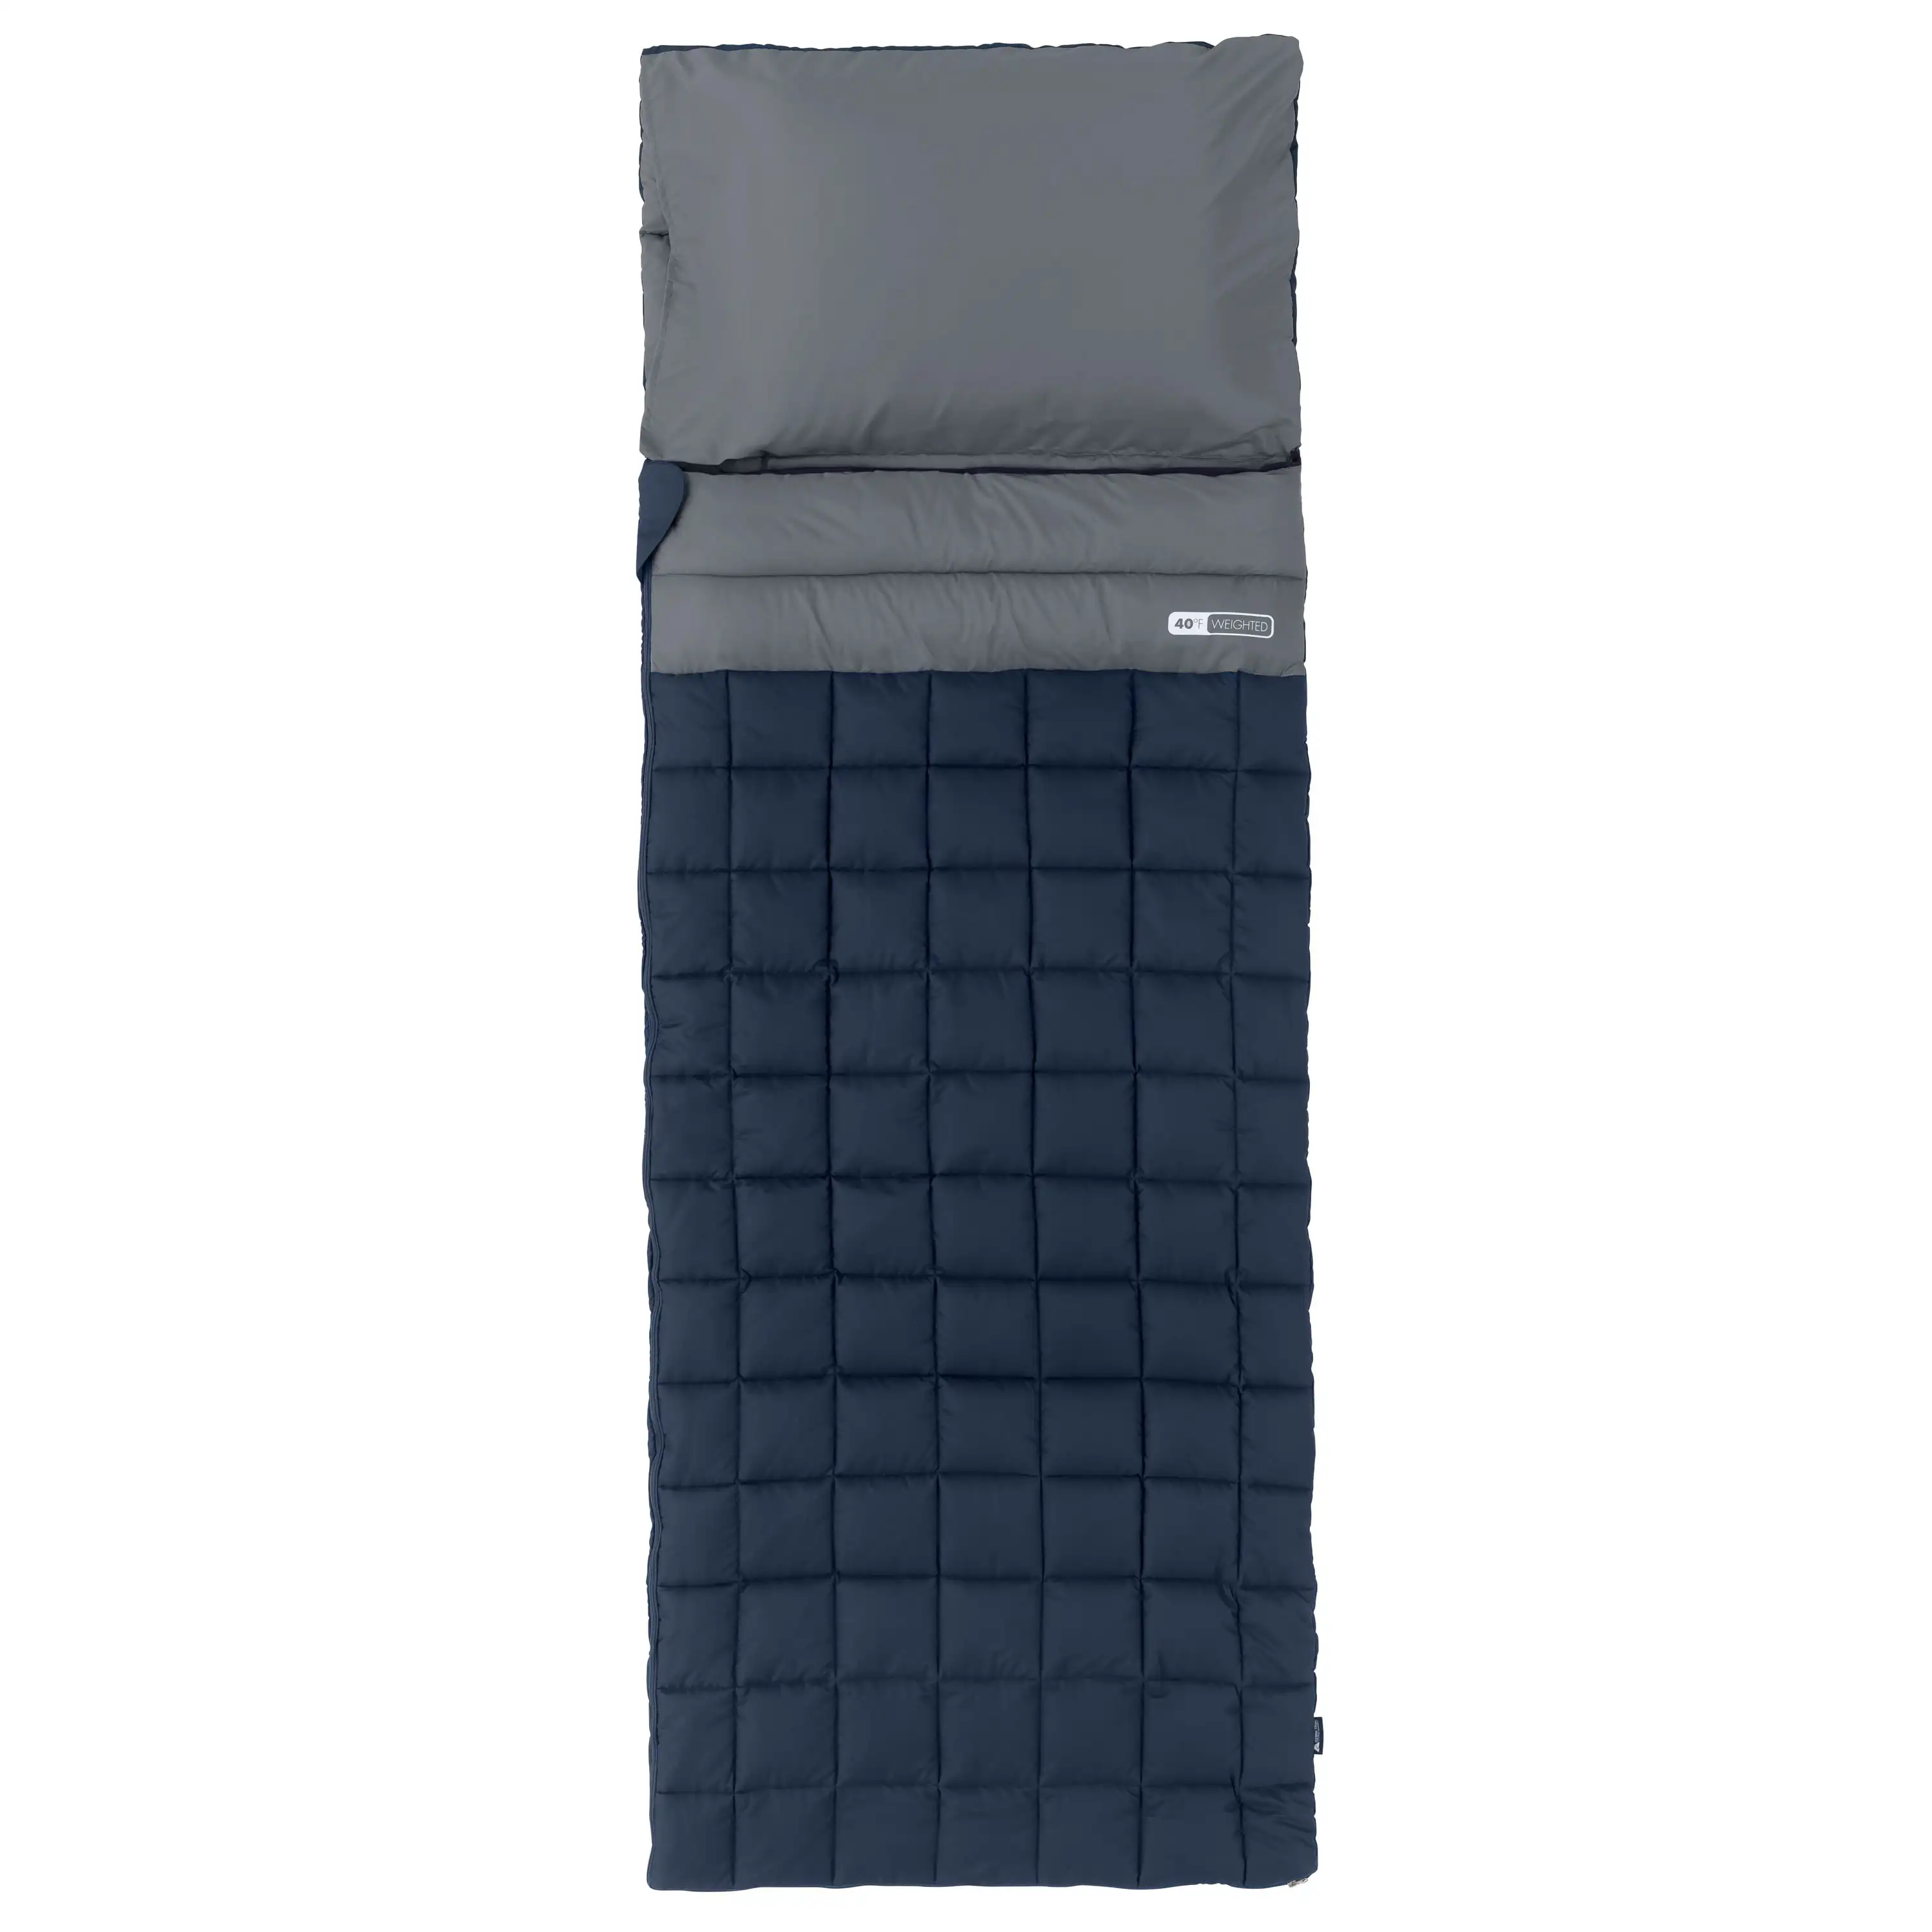 

40F Weighted Adult Sleeping Bag – Navy & Gray (size 95 in. x 34 in.) sleeping bag camping ultralight camping ultralight